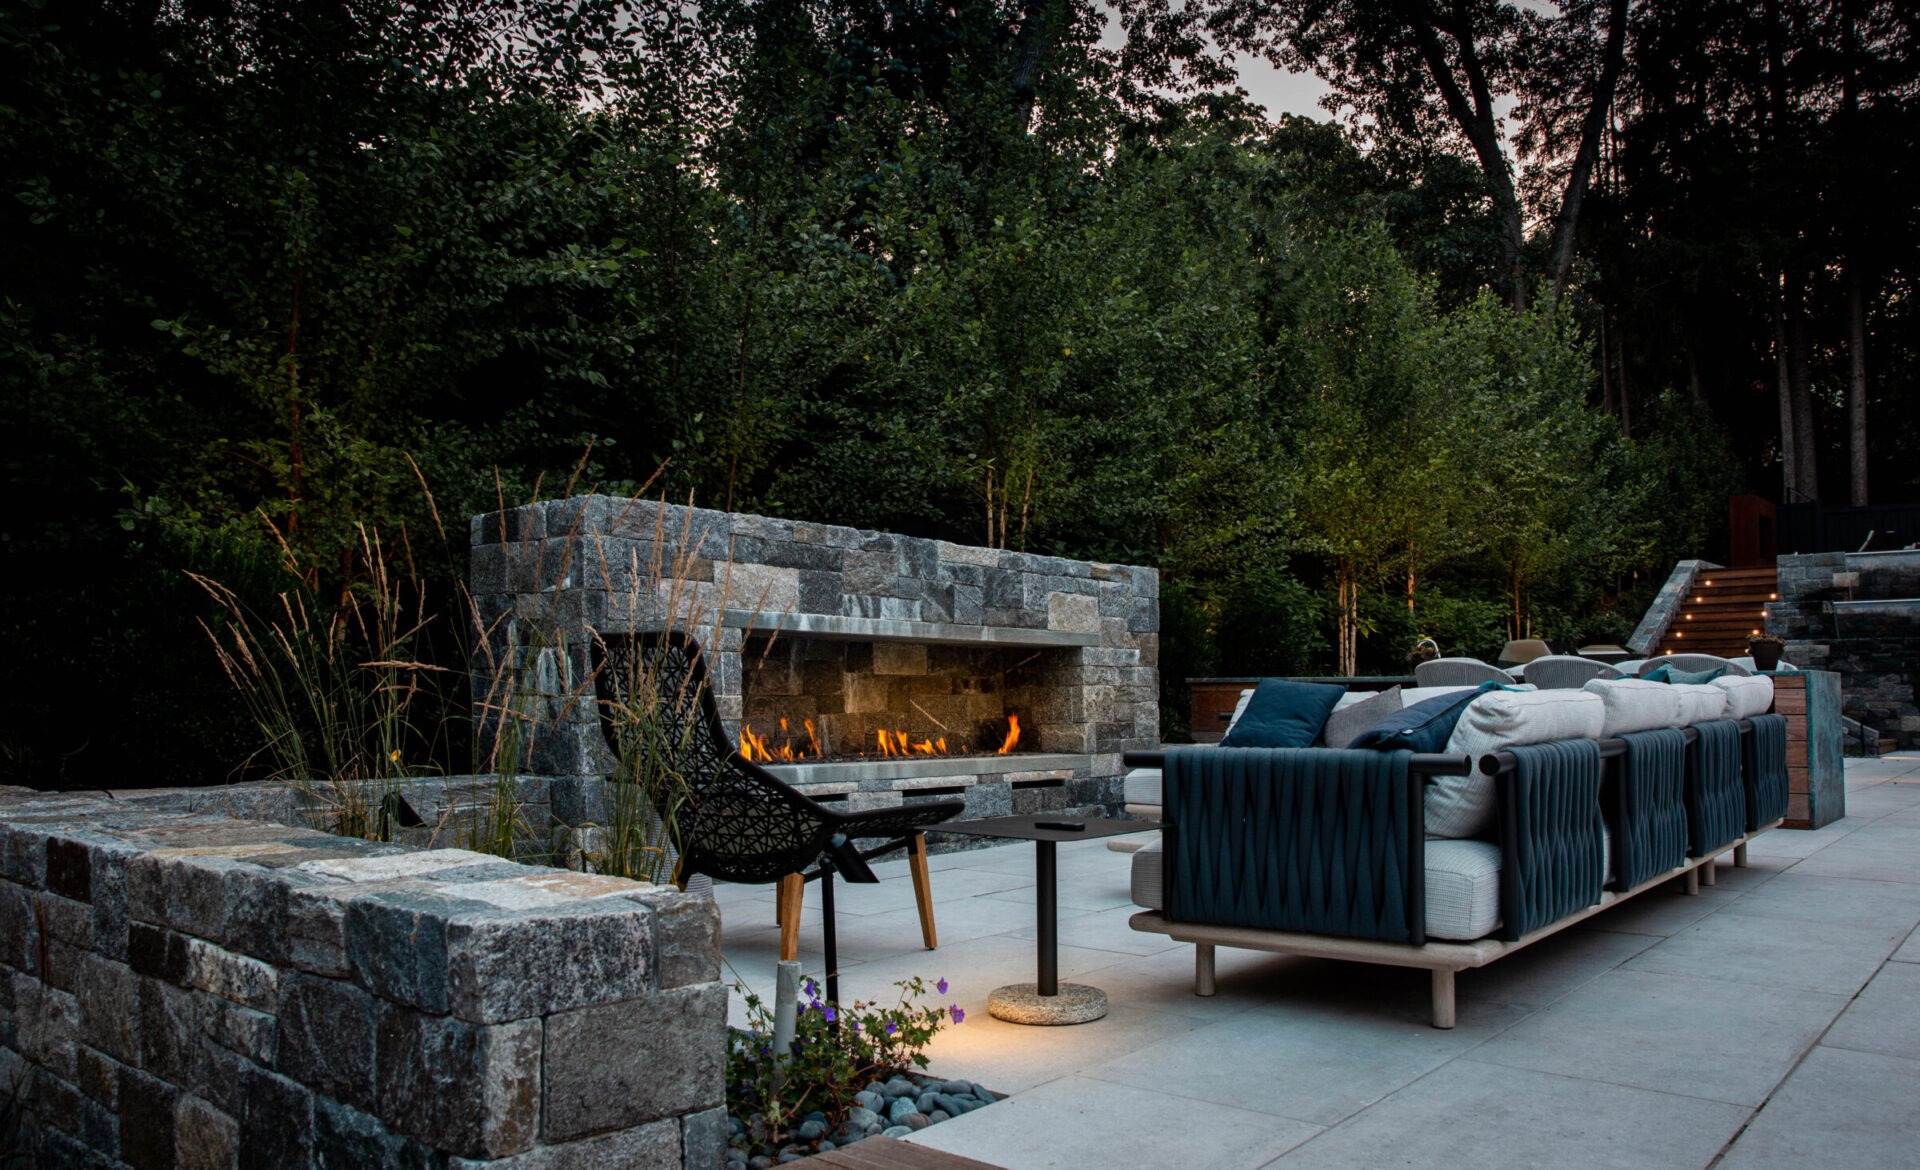 An outdoor living area with a stone fireplace, comfortable seating, table, and surrounding greenery at dusk, exuding a cozy and inviting atmosphere.